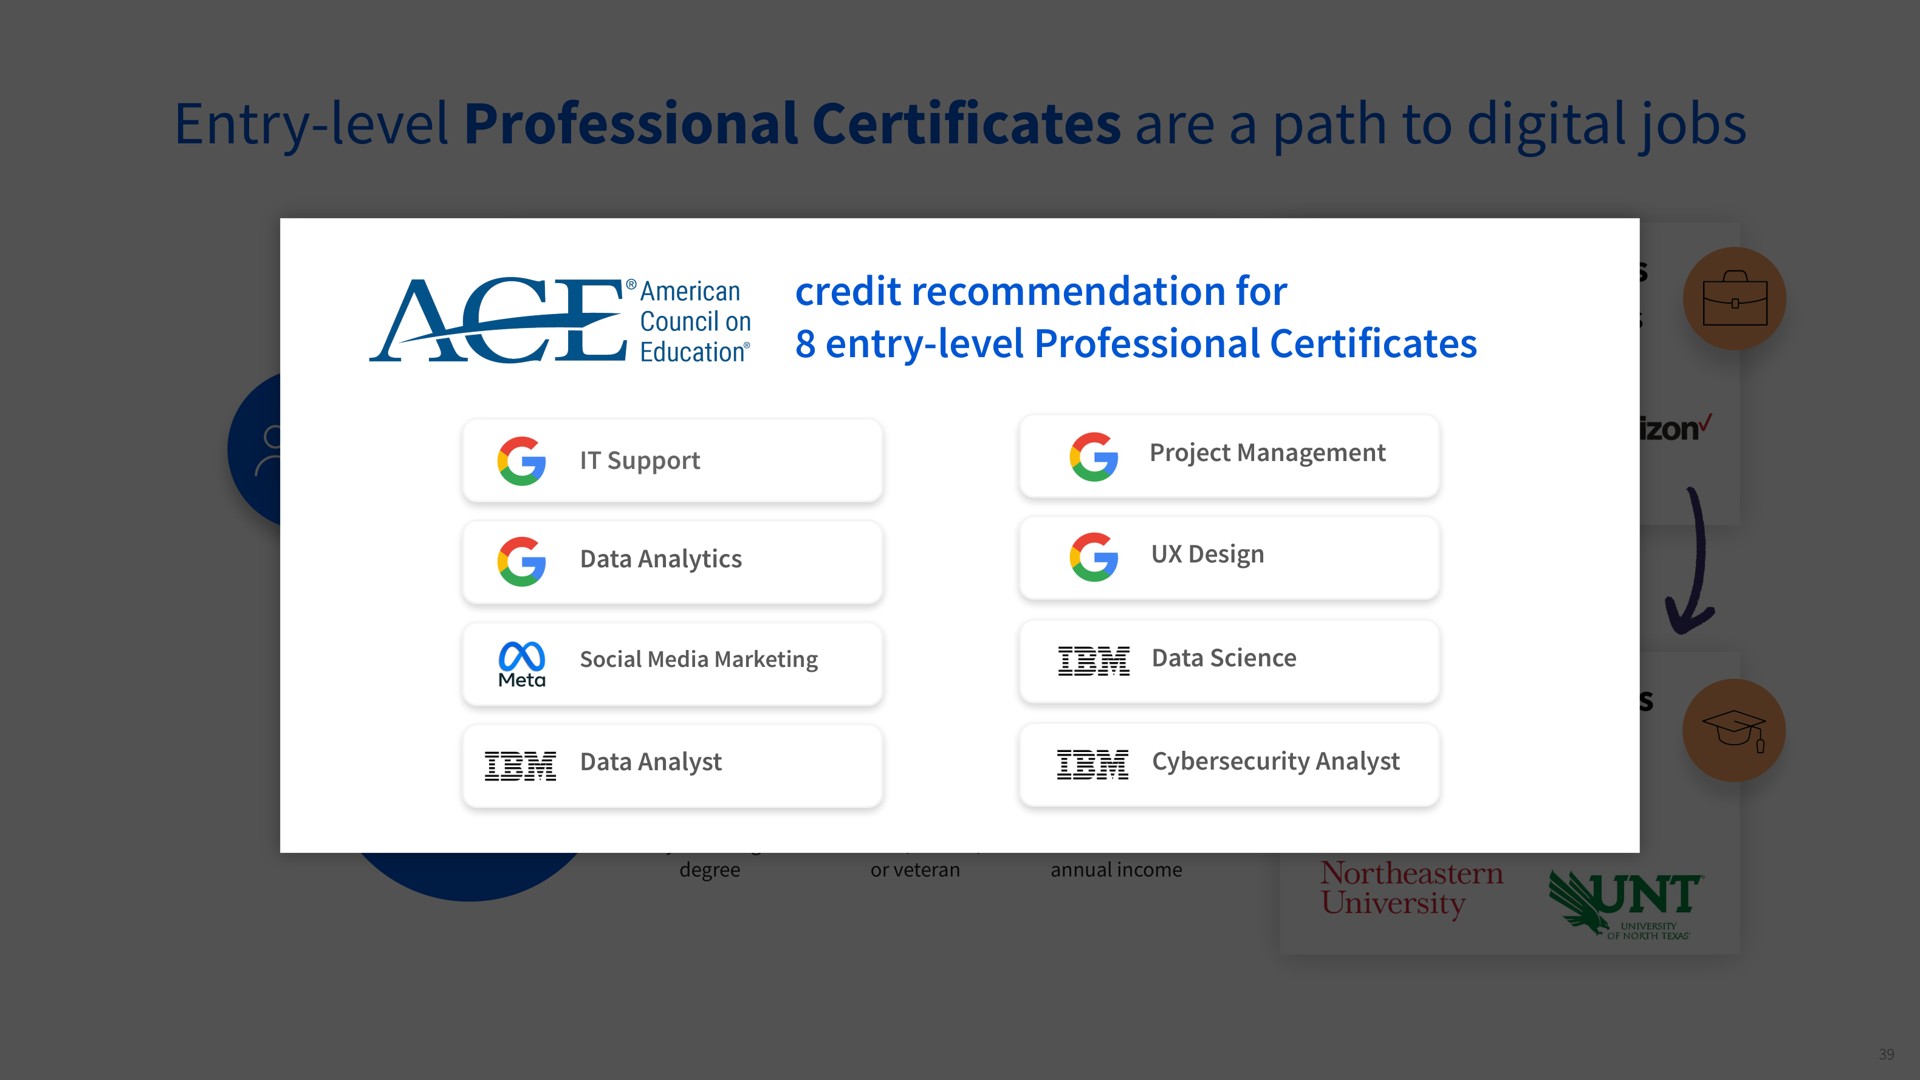 entry level professional certificates are a path to digital jobs partners credit recommendation for entry level professional certificates career pathways hiring partners community colleges it support data analytics it support project management design enrollments data science degree pathways data analyst analyst | Coursera